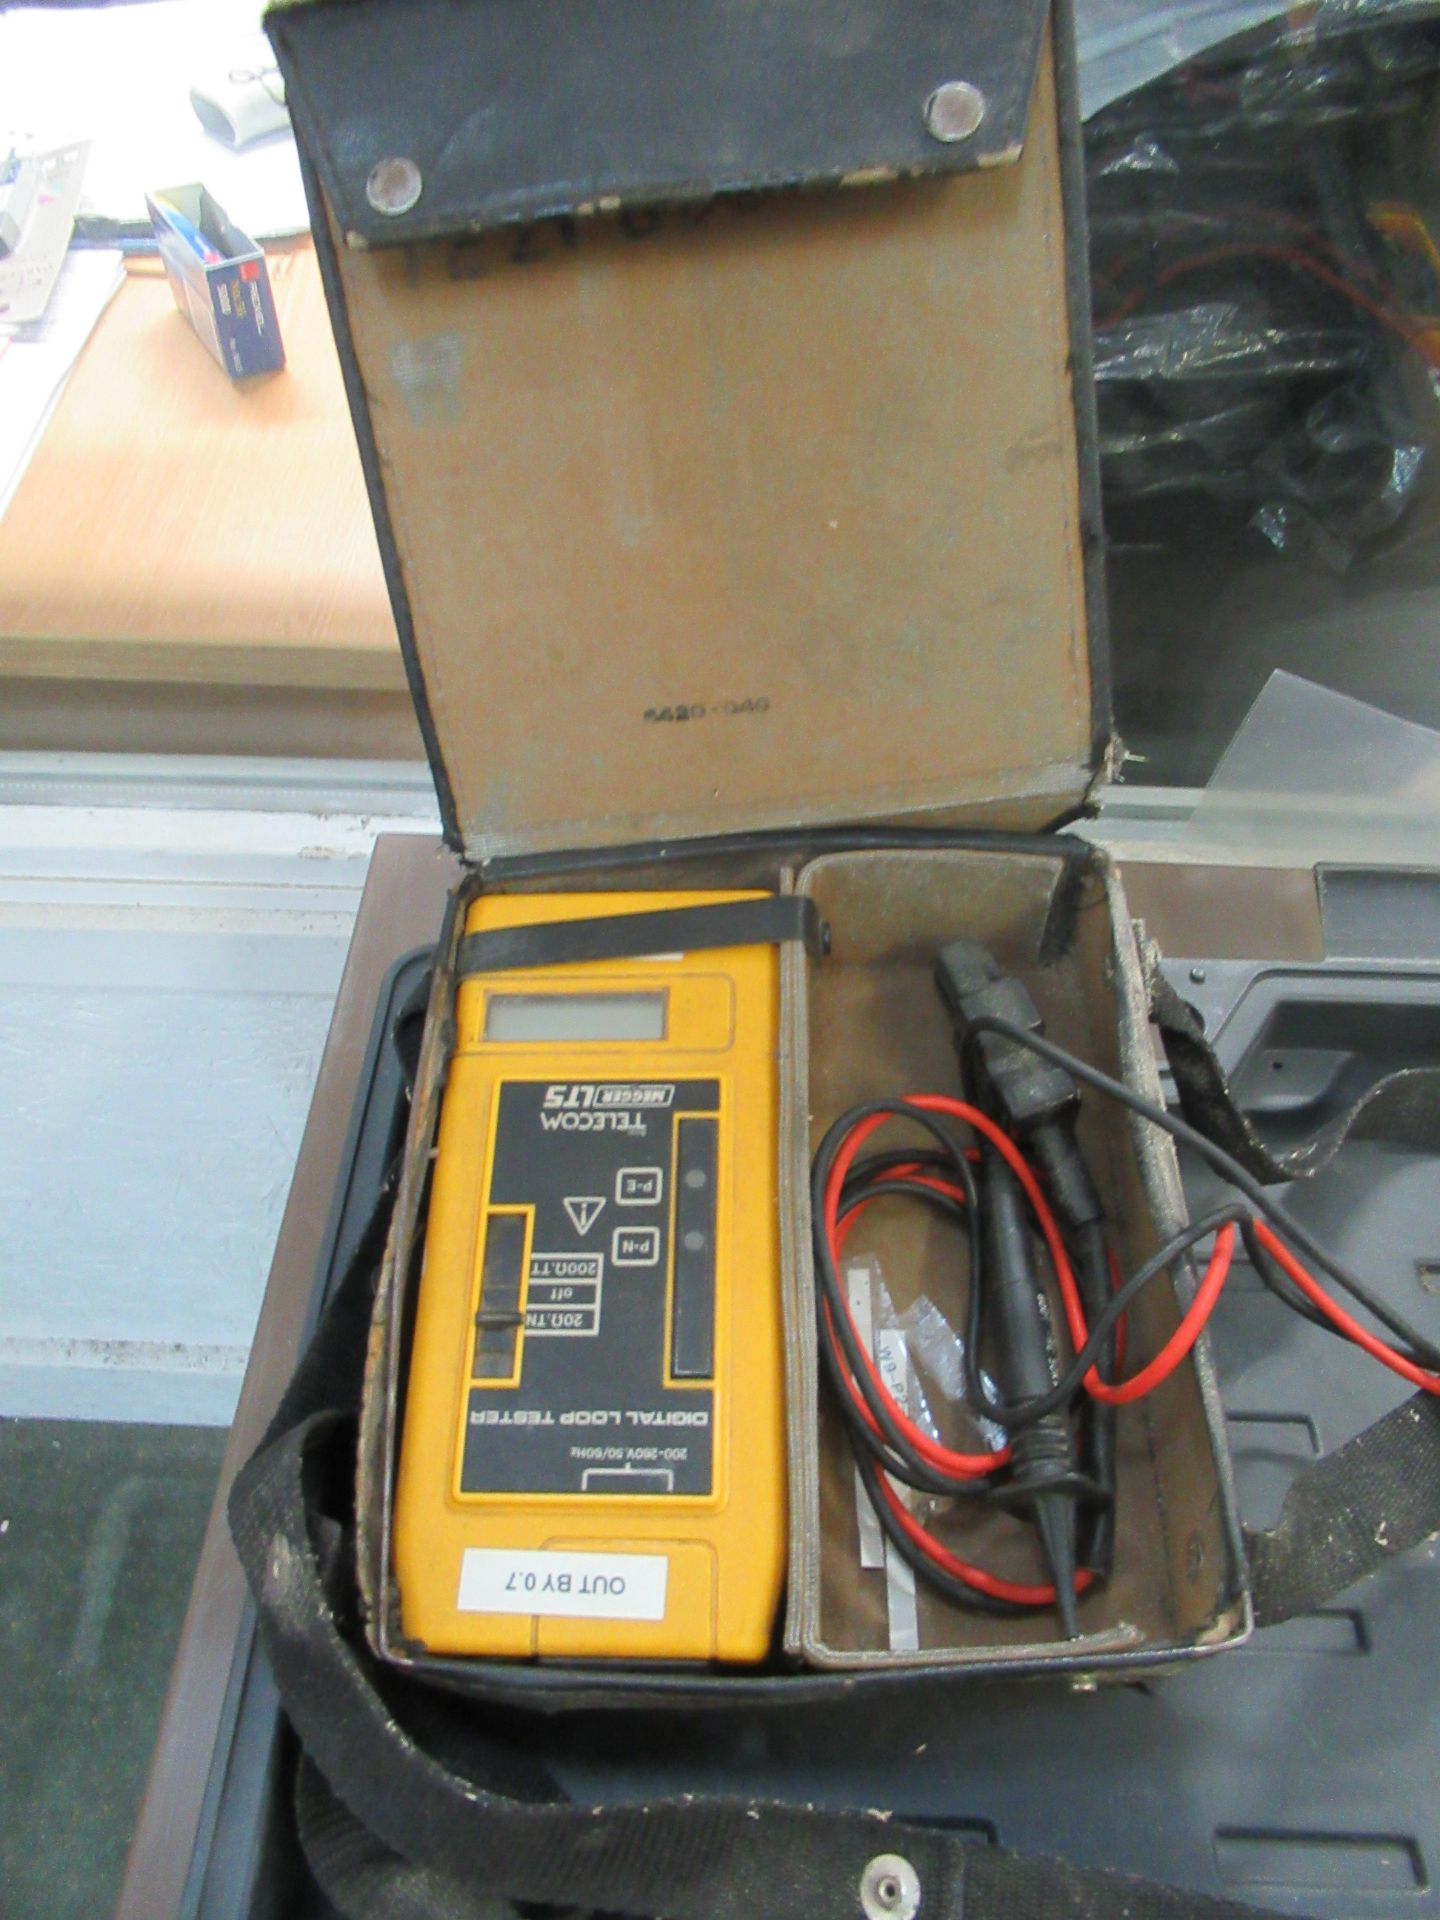 Di Log 17th Edition Multi-Function Tester with MEGGER LTS Digital Loop Tester - Image 2 of 2